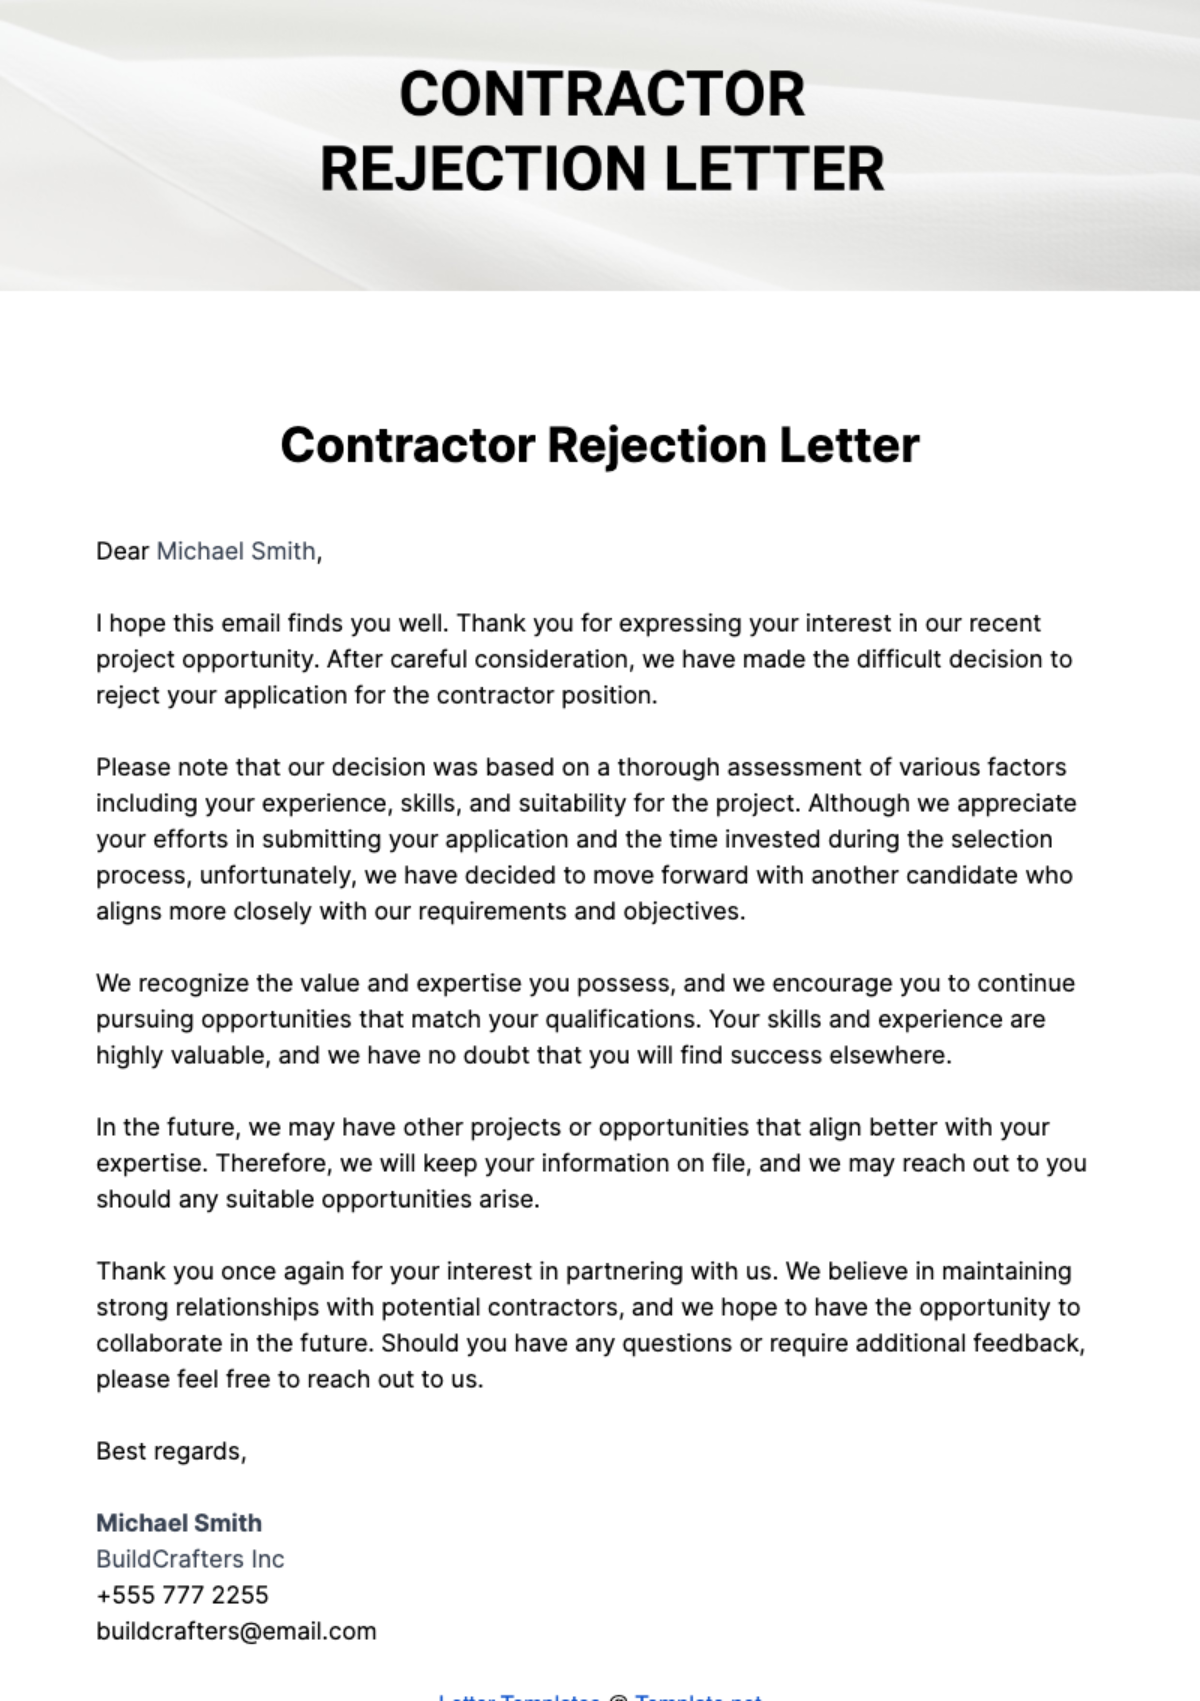 Free Contractor Rejection Letter Template